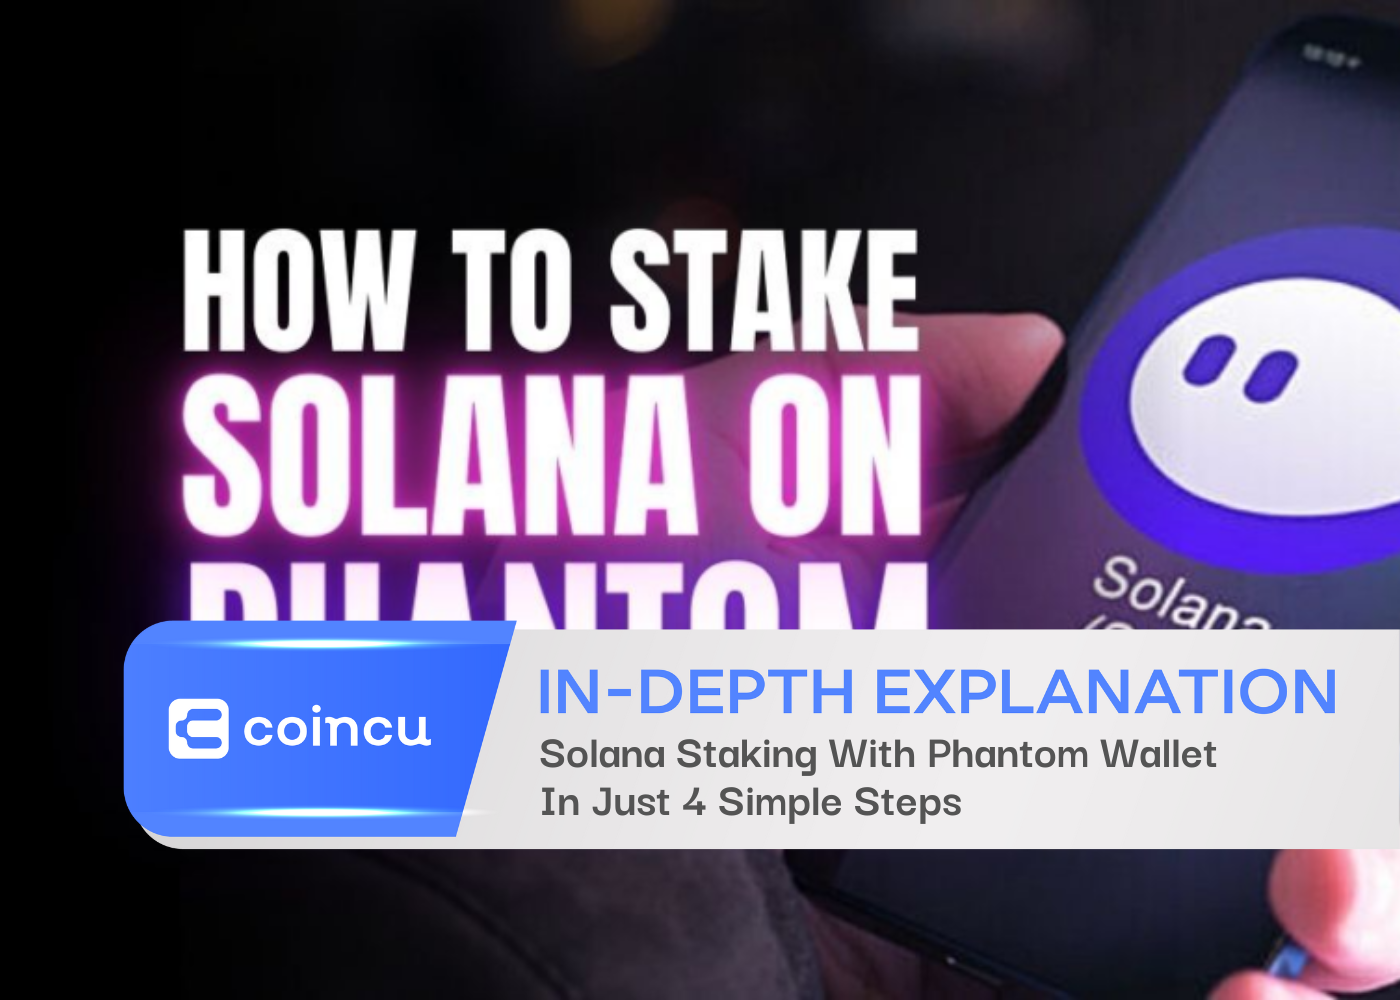 Solana Staking With Phantom Wallet In Just 4 Simple Steps